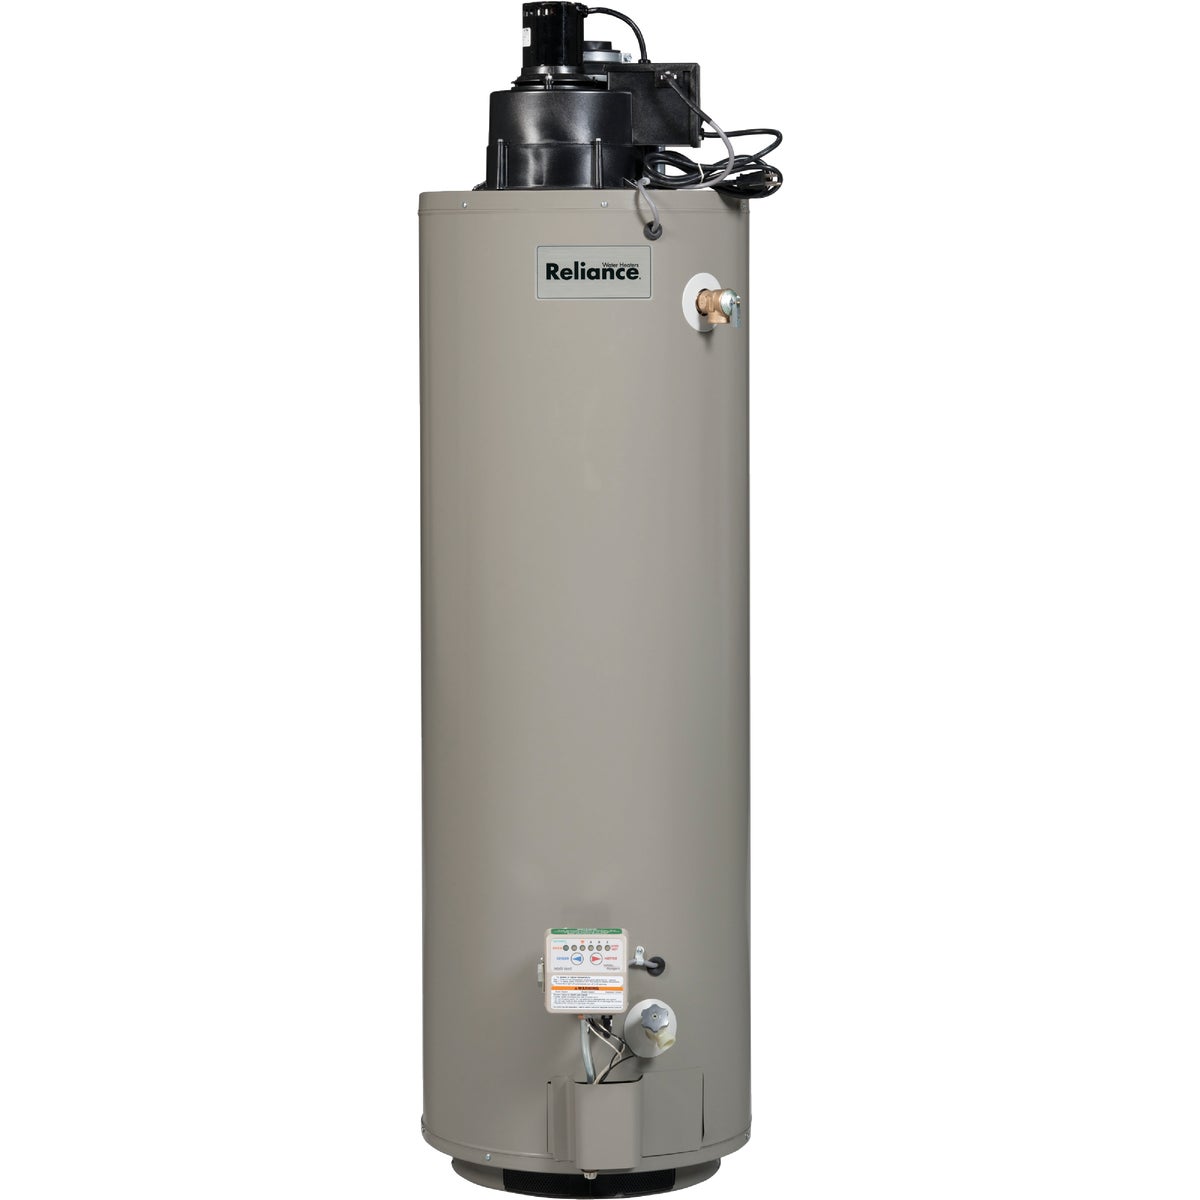 Item 467532, Liquid propane water heater with power-vent 3-position (9, 12 and 3 o'clock